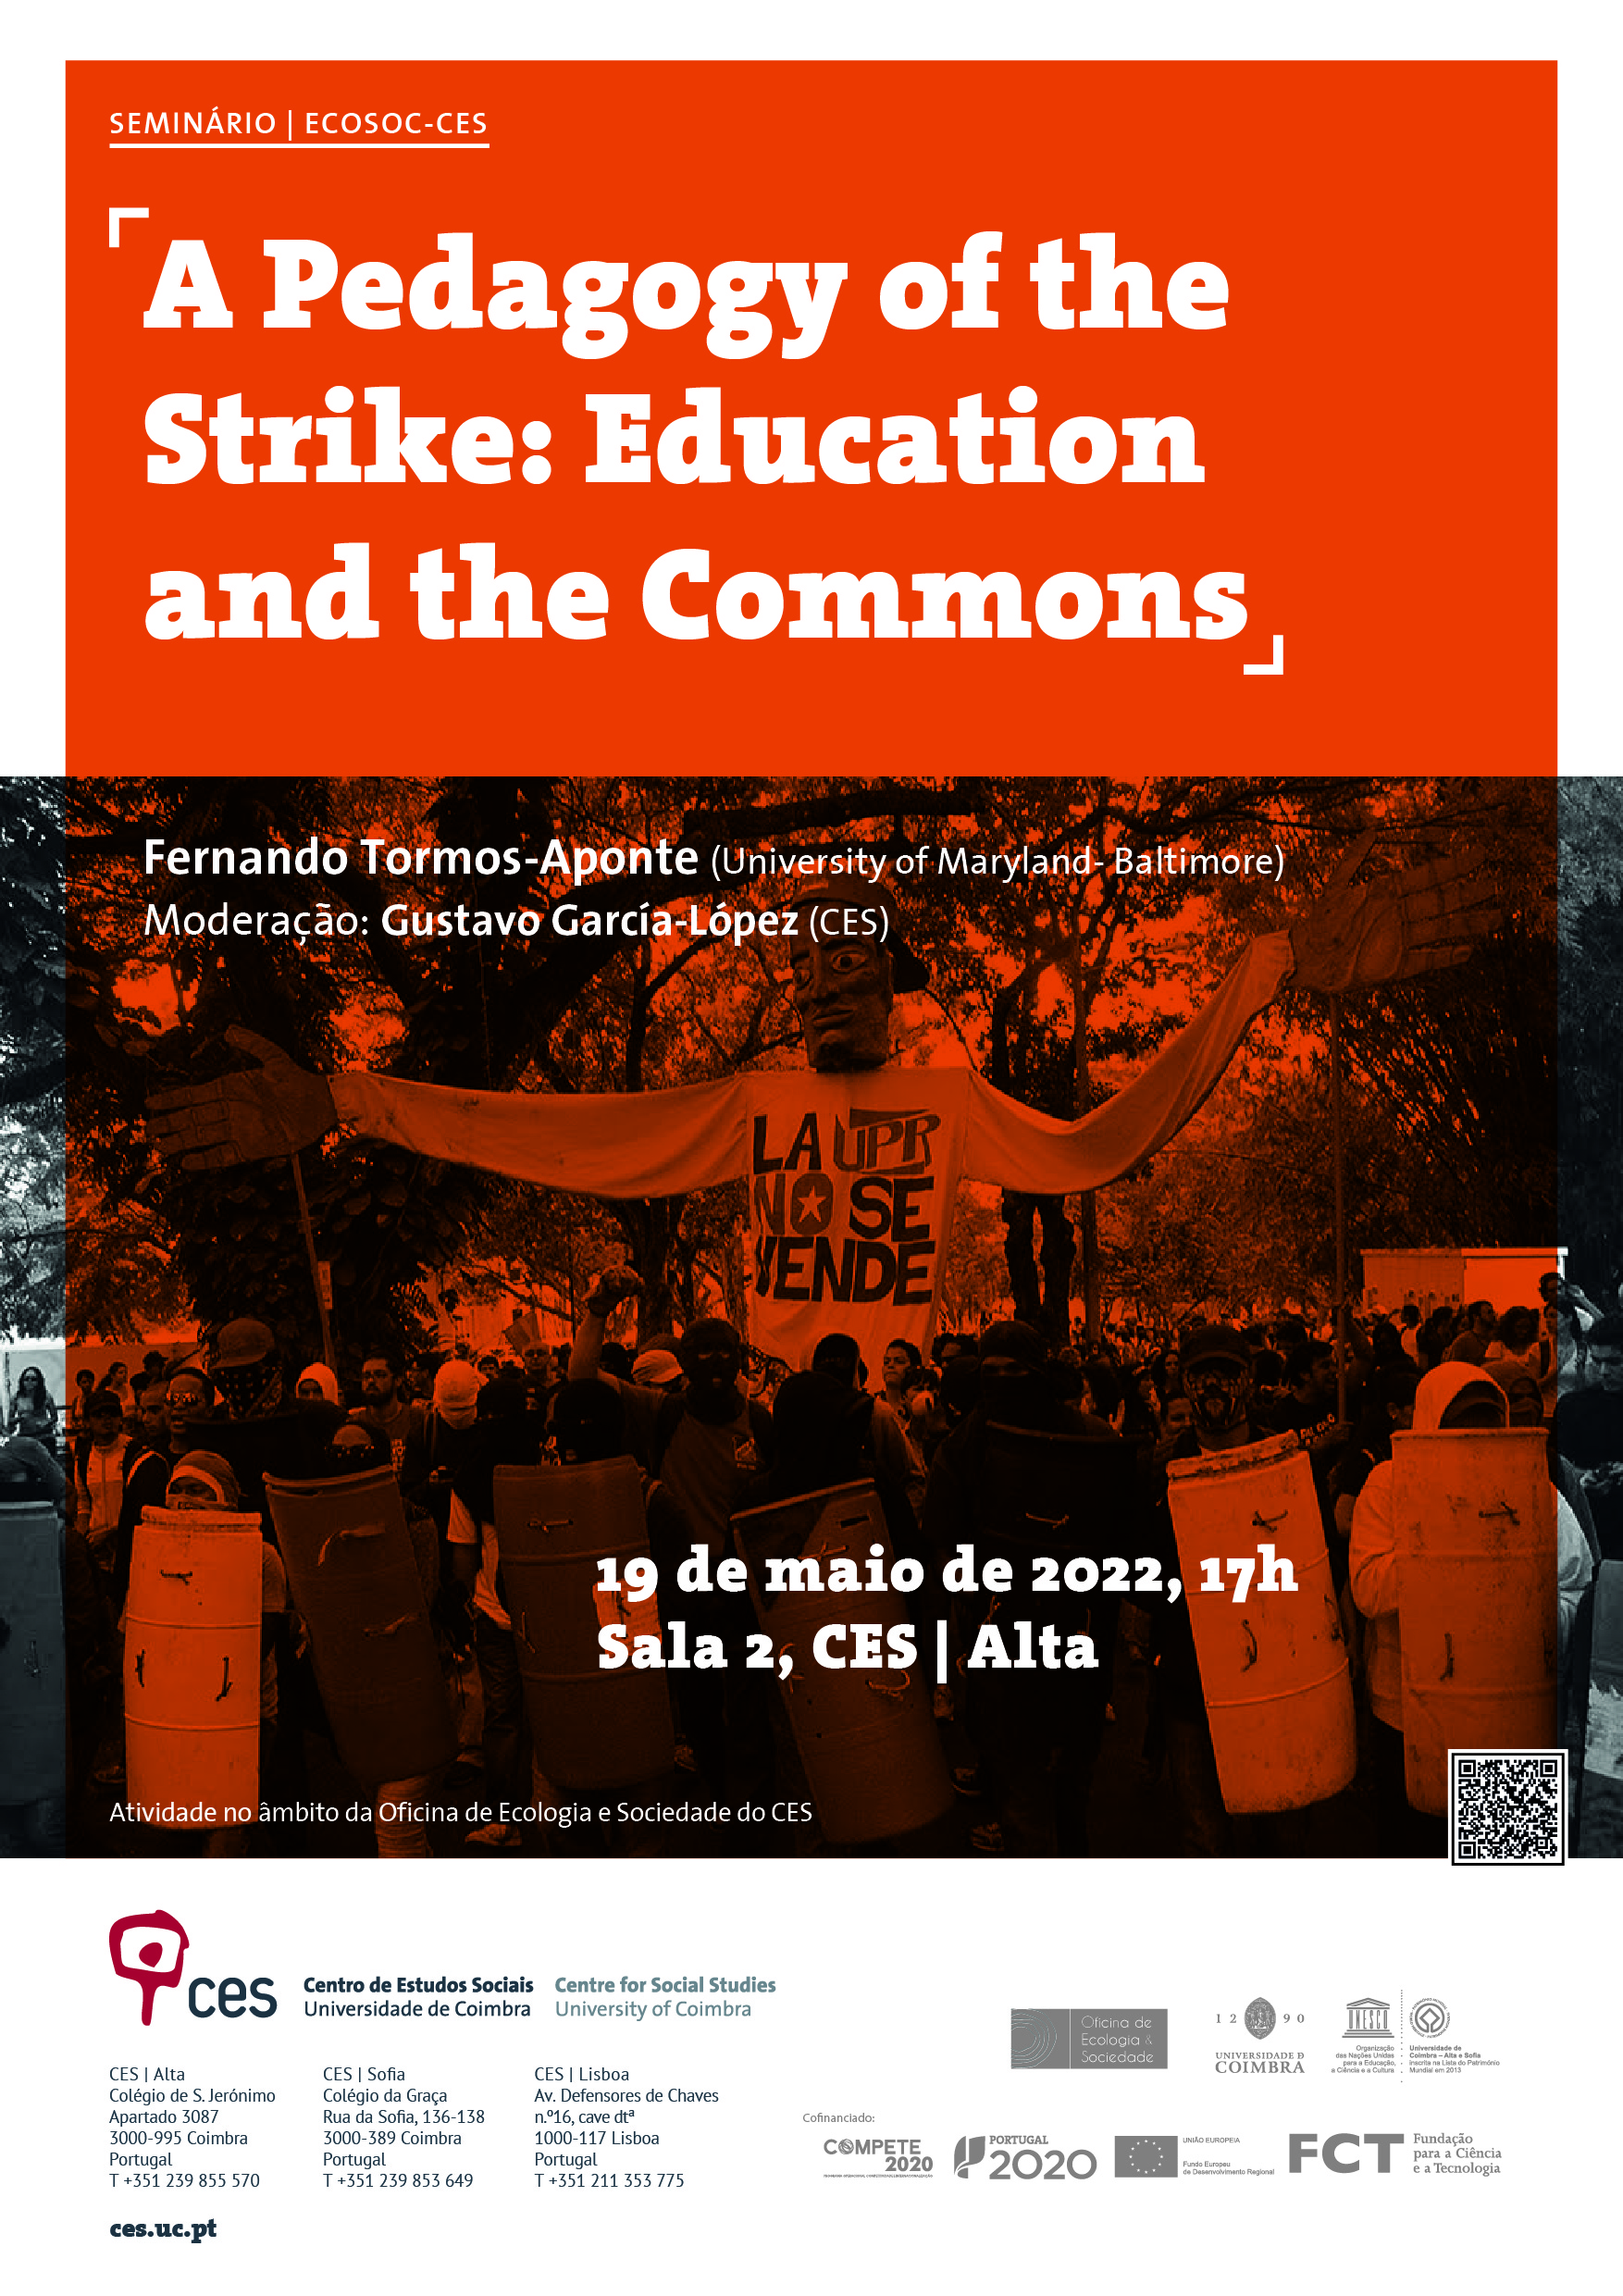 A Pedagogy of the Strike: Education and the Commons<span id="edit_38486"><script>$(function() { $('#edit_38486').load( "/myces/user/editobj.php?tipo=evento&id=38486" ); });</script></span>